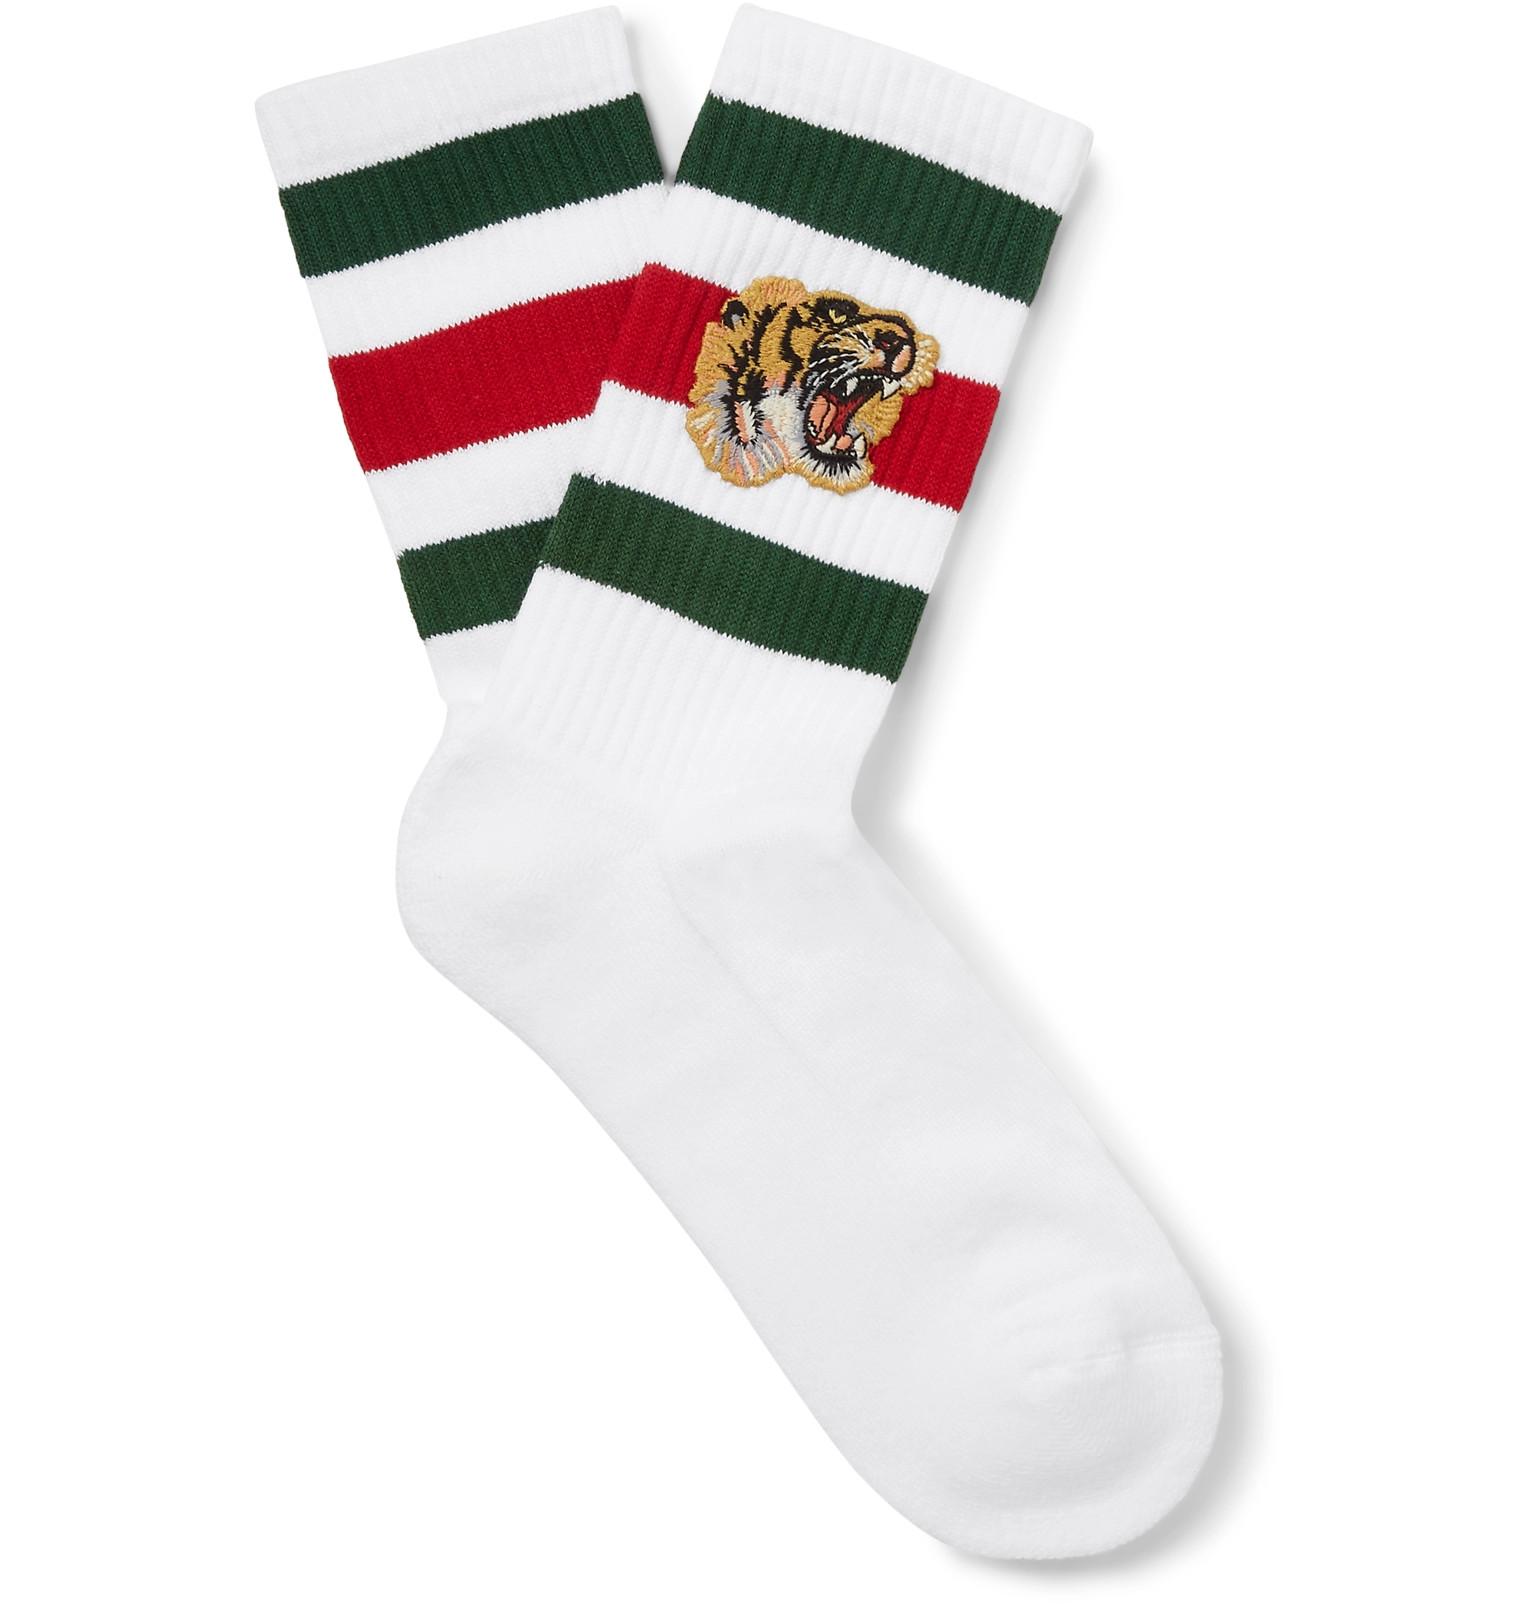 Tiger Embroidery Socks  White Red Green Stretch Cotton TIGER G g  Socks 